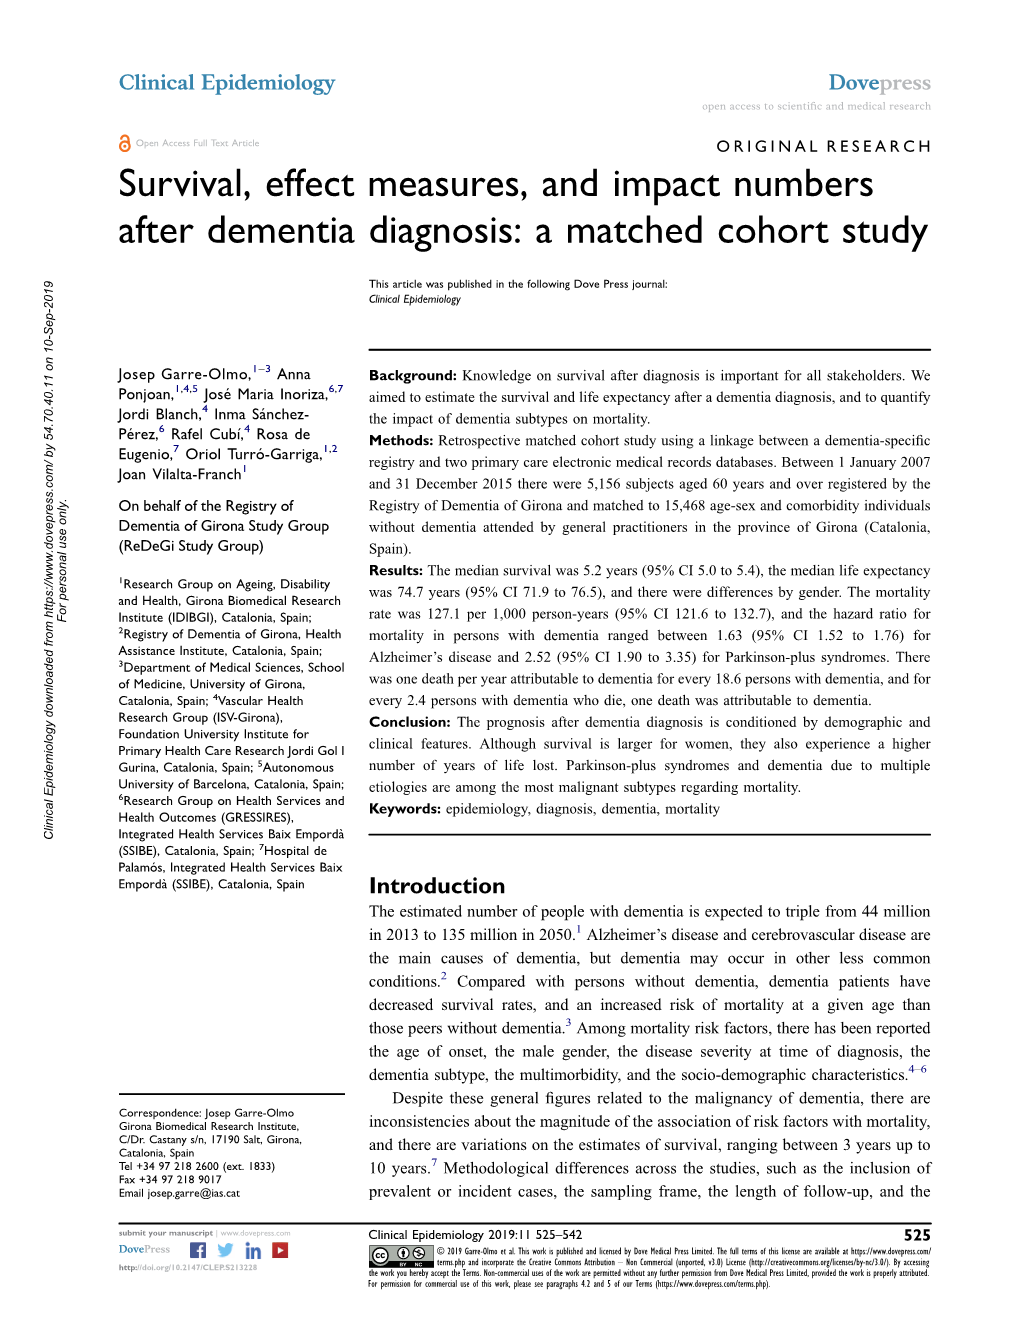 Survival, Effect Measures, and Impact Numbers After Dementia Diagnosis: a Matched Cohort Study